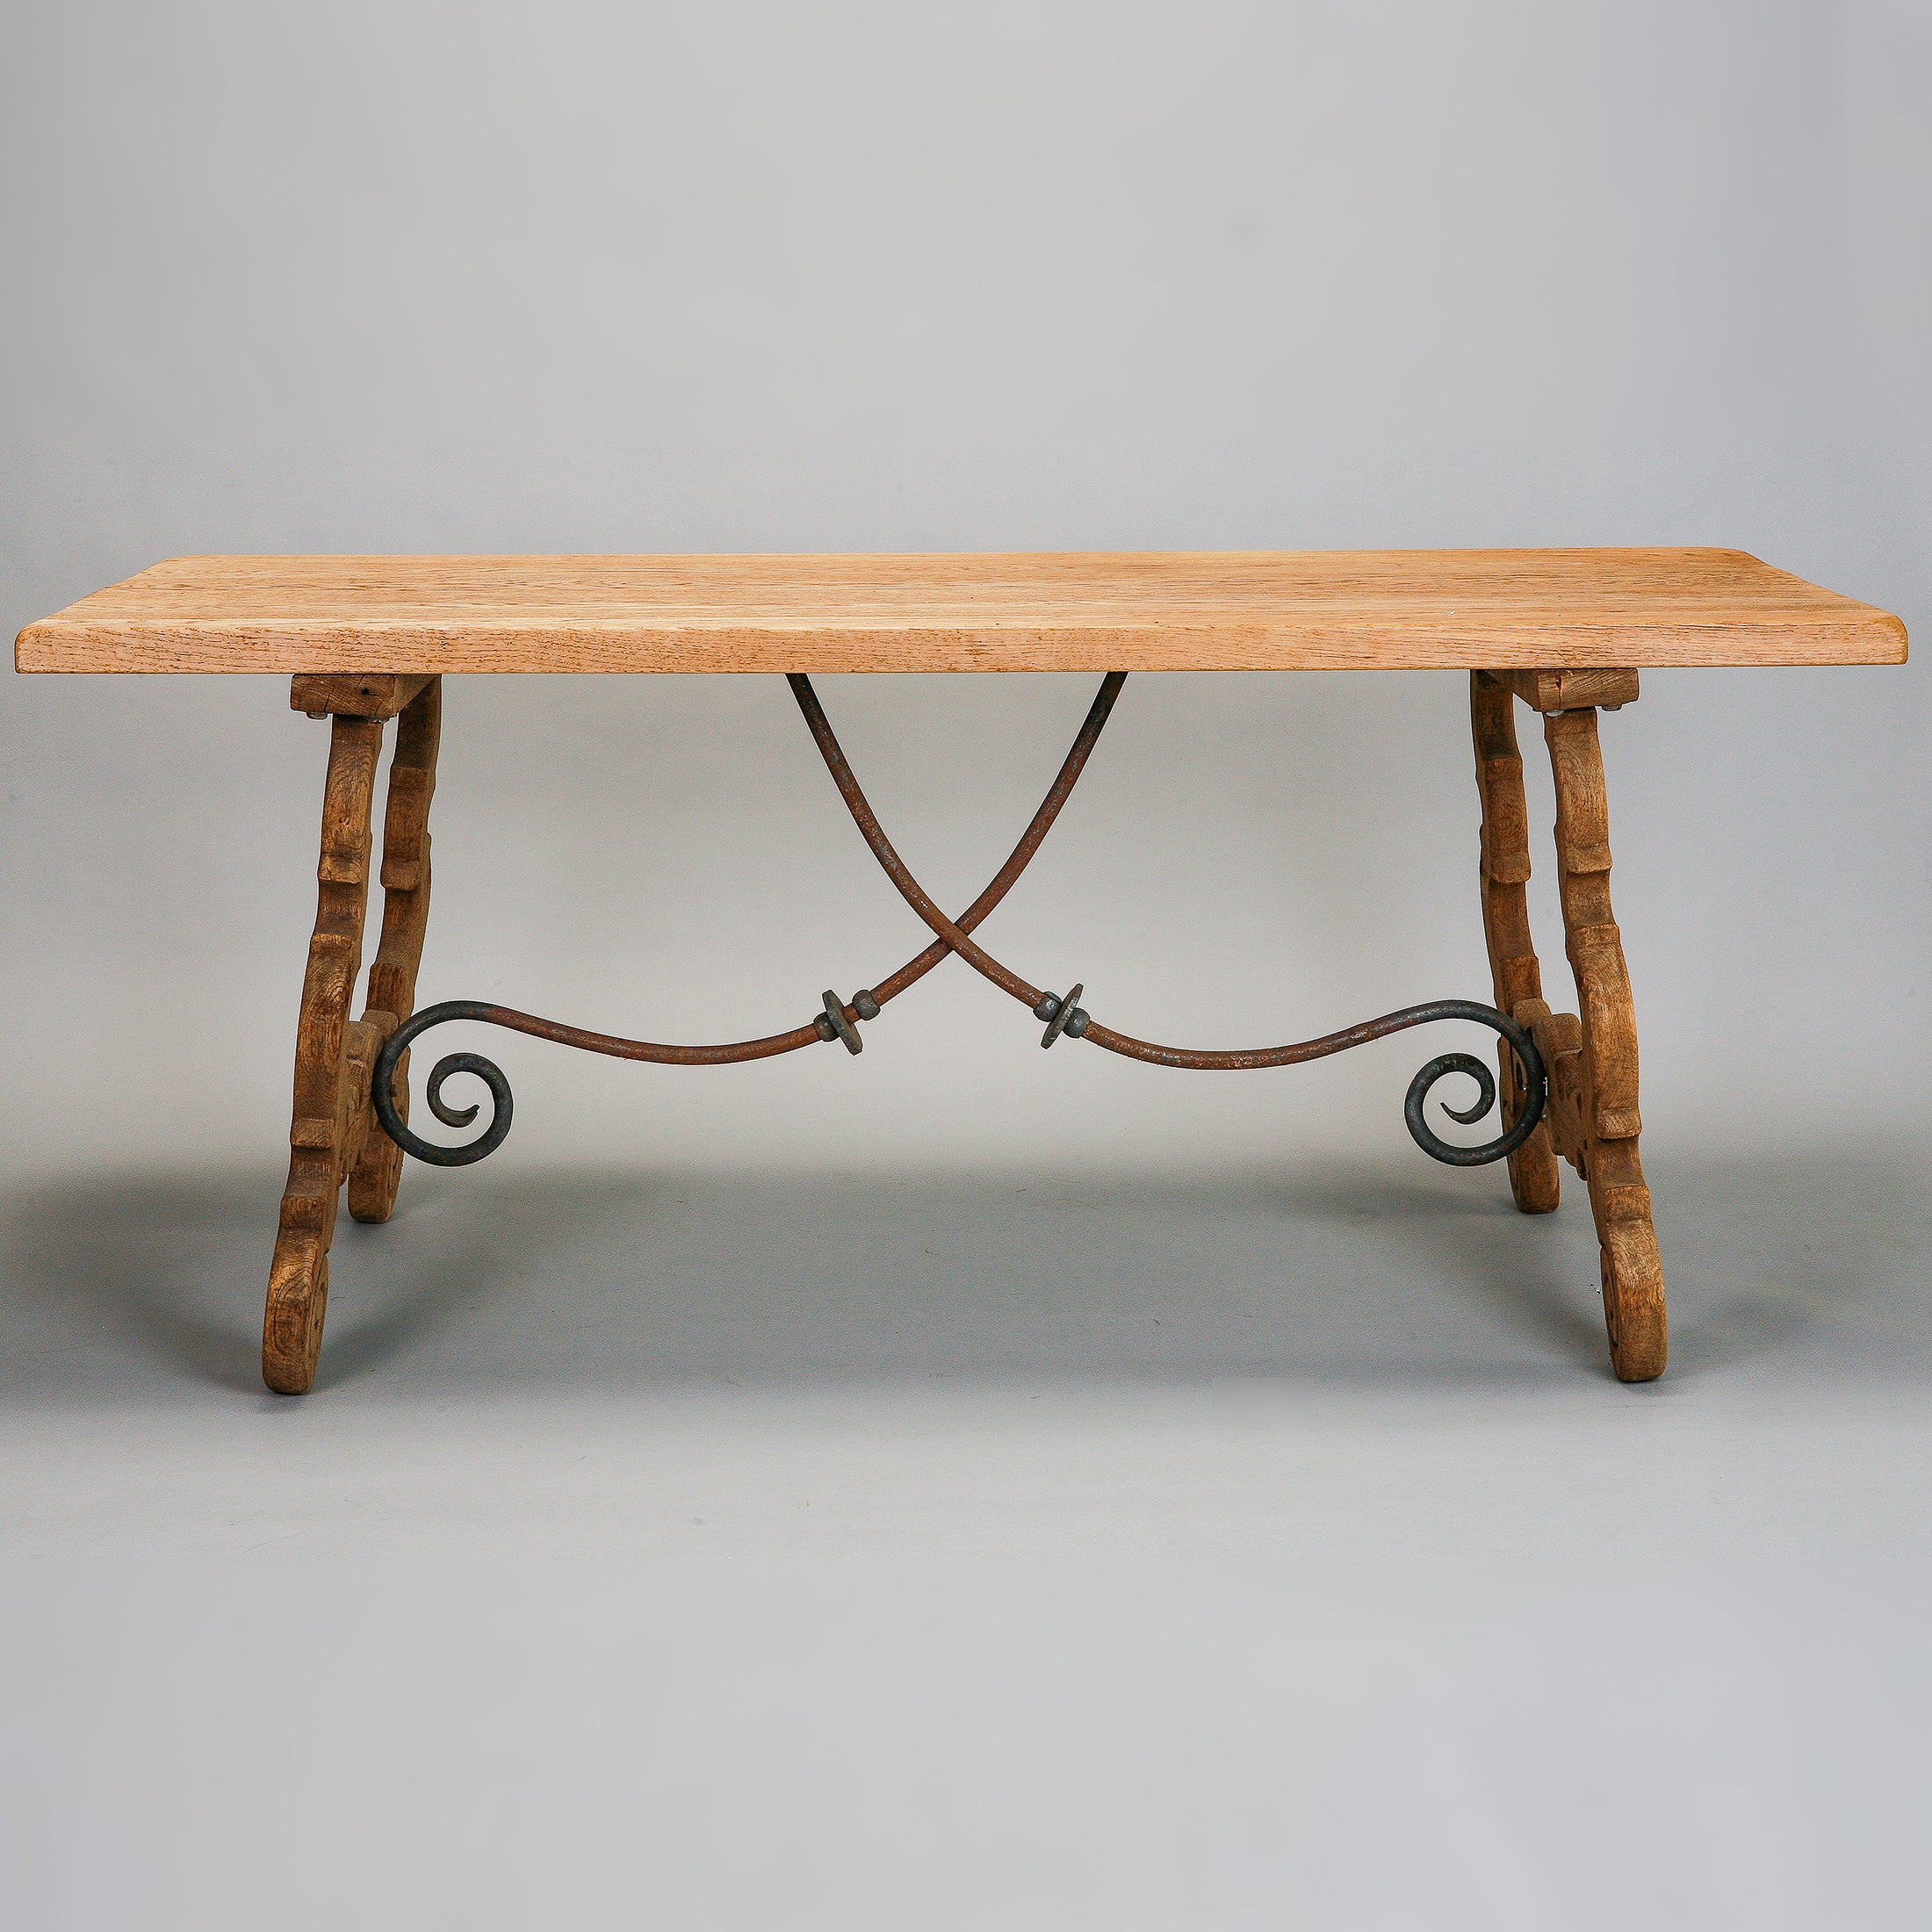 19th Century Spanish Bleached Oak Table with Iron Stretchers